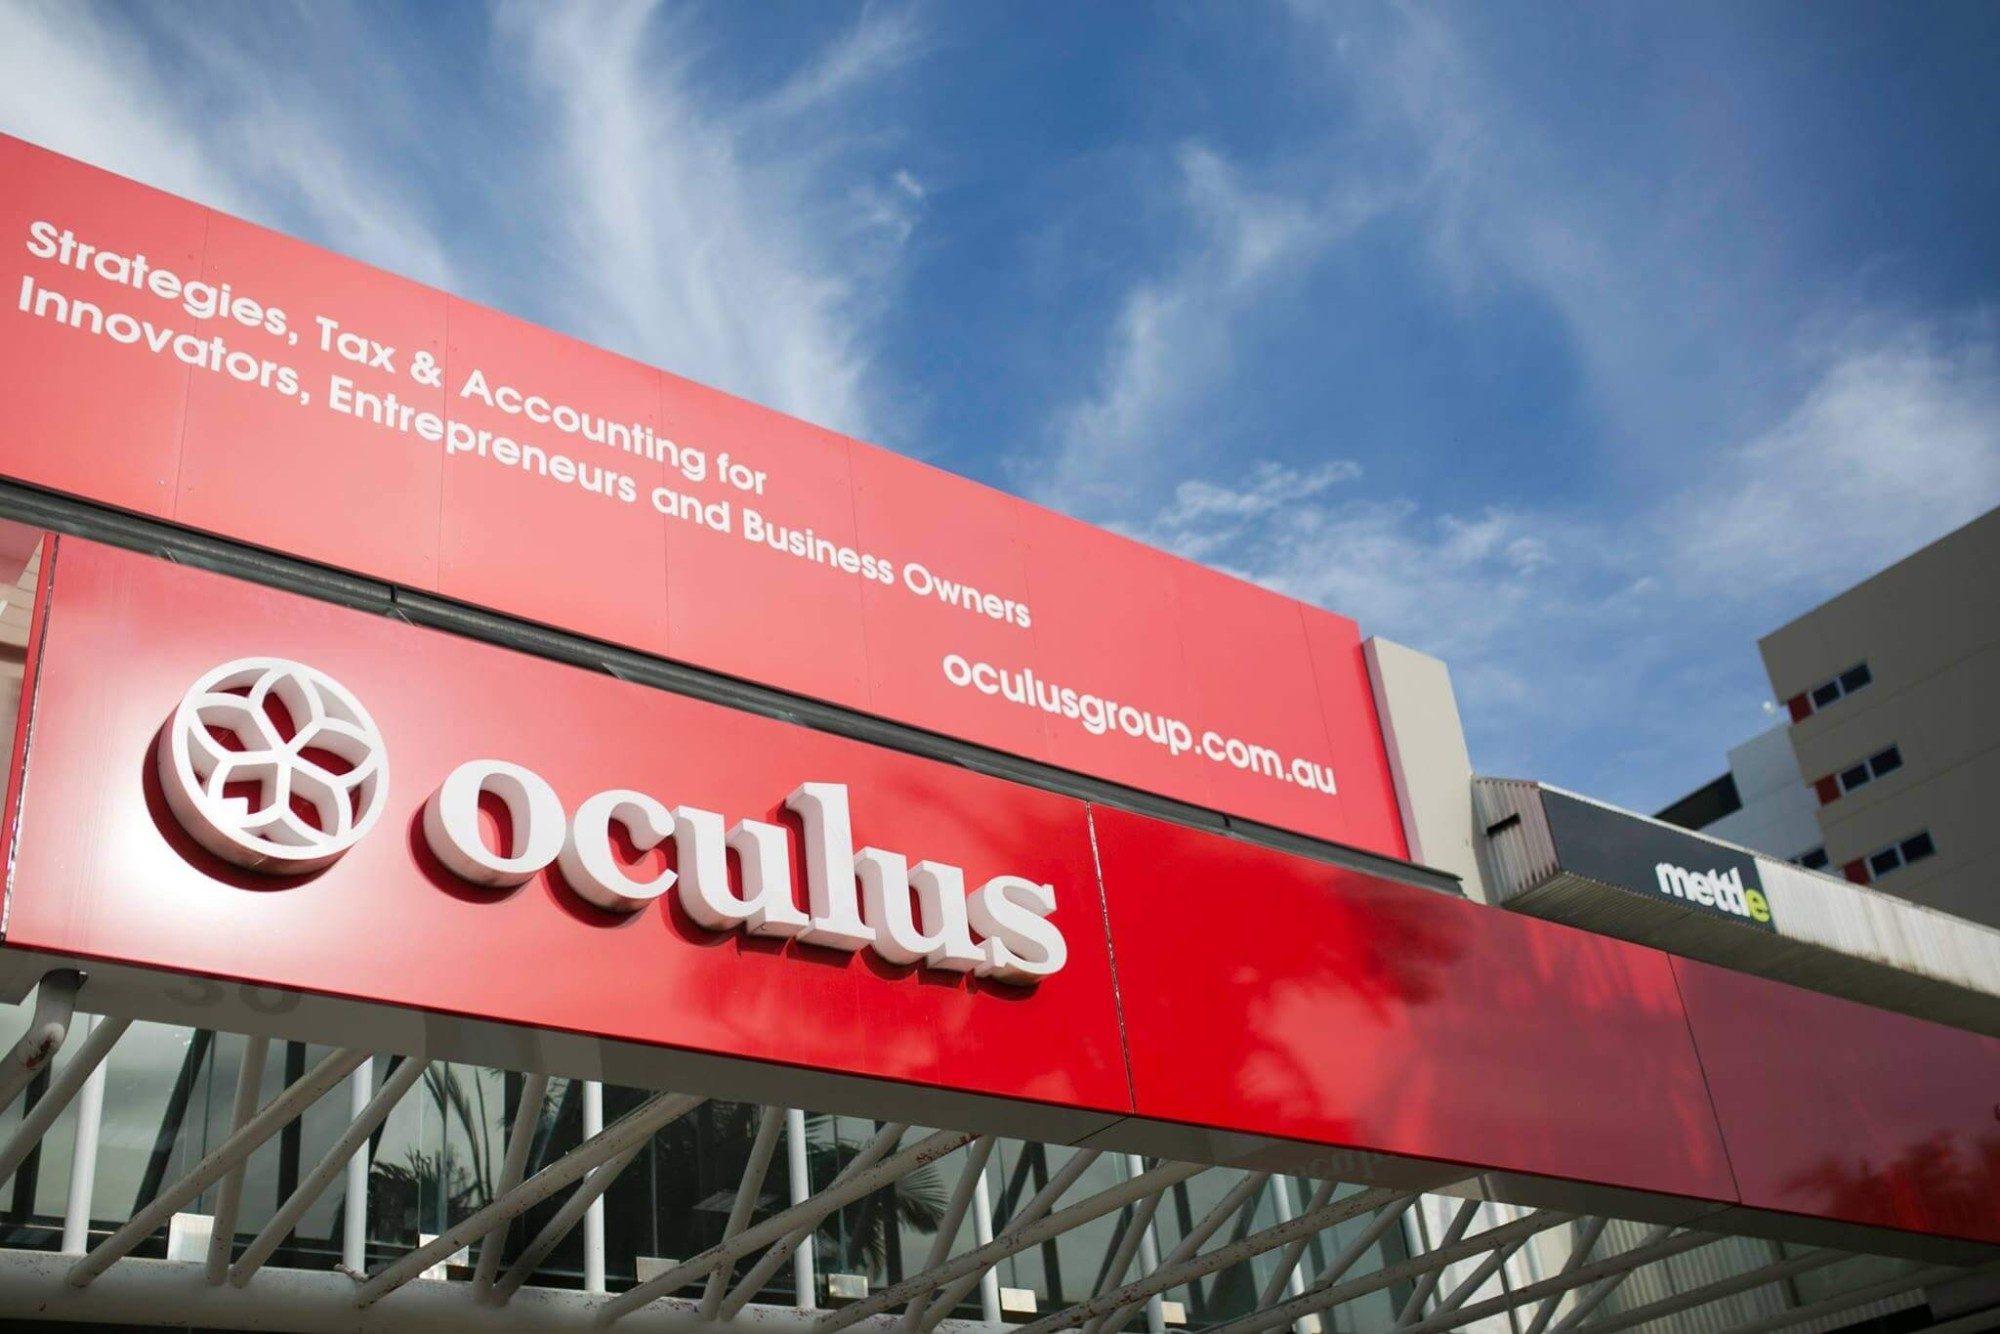 How Oculus Financial Services Group Benefits from using Nimbus